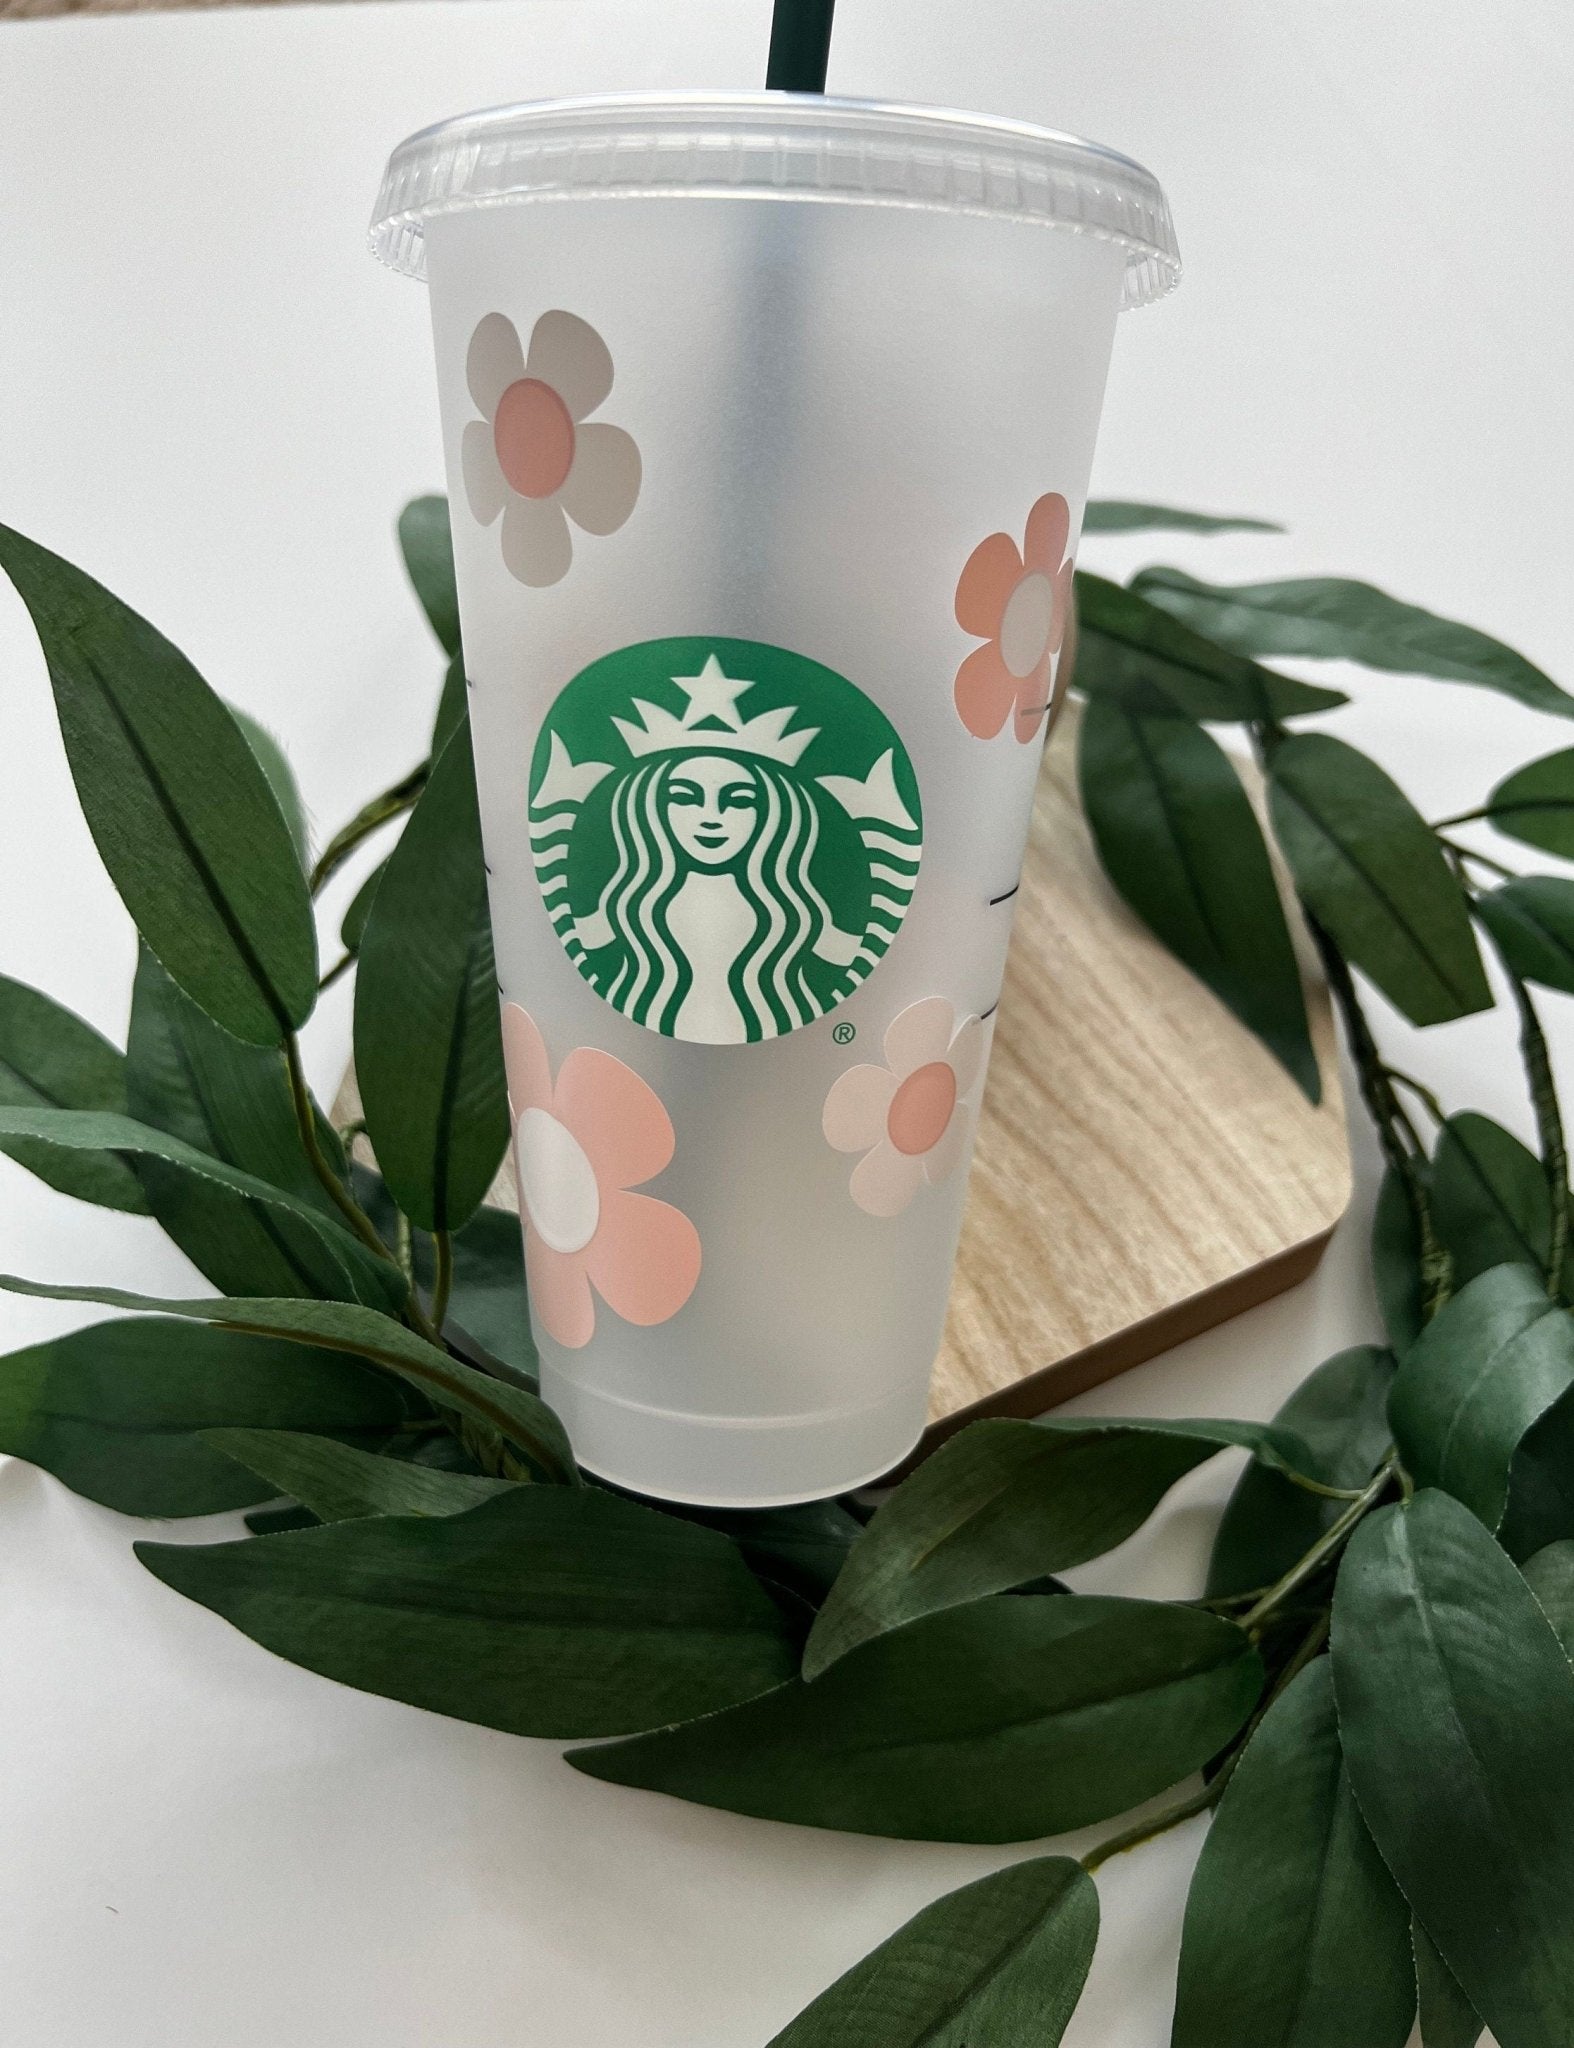 24oz Reusable Cold Coffee Cup with Daisy Design